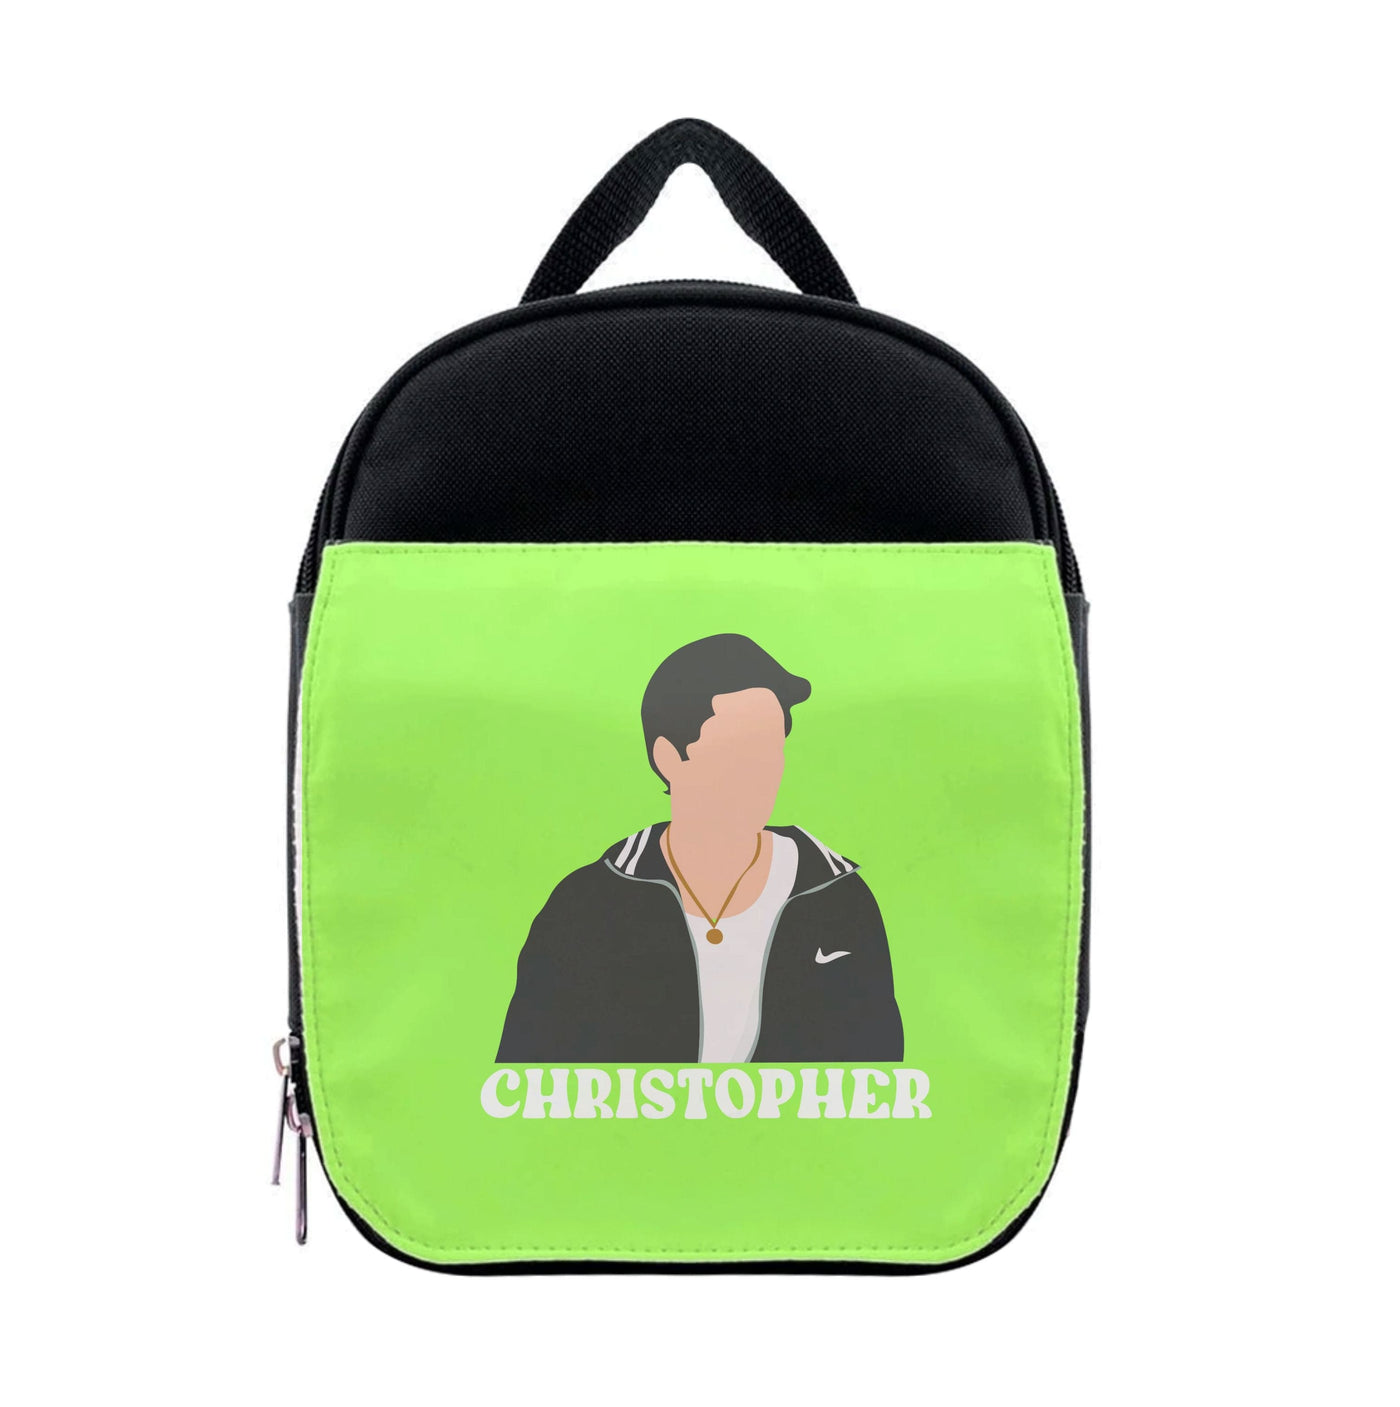 Cristopher - The Sopranos Lunchbox